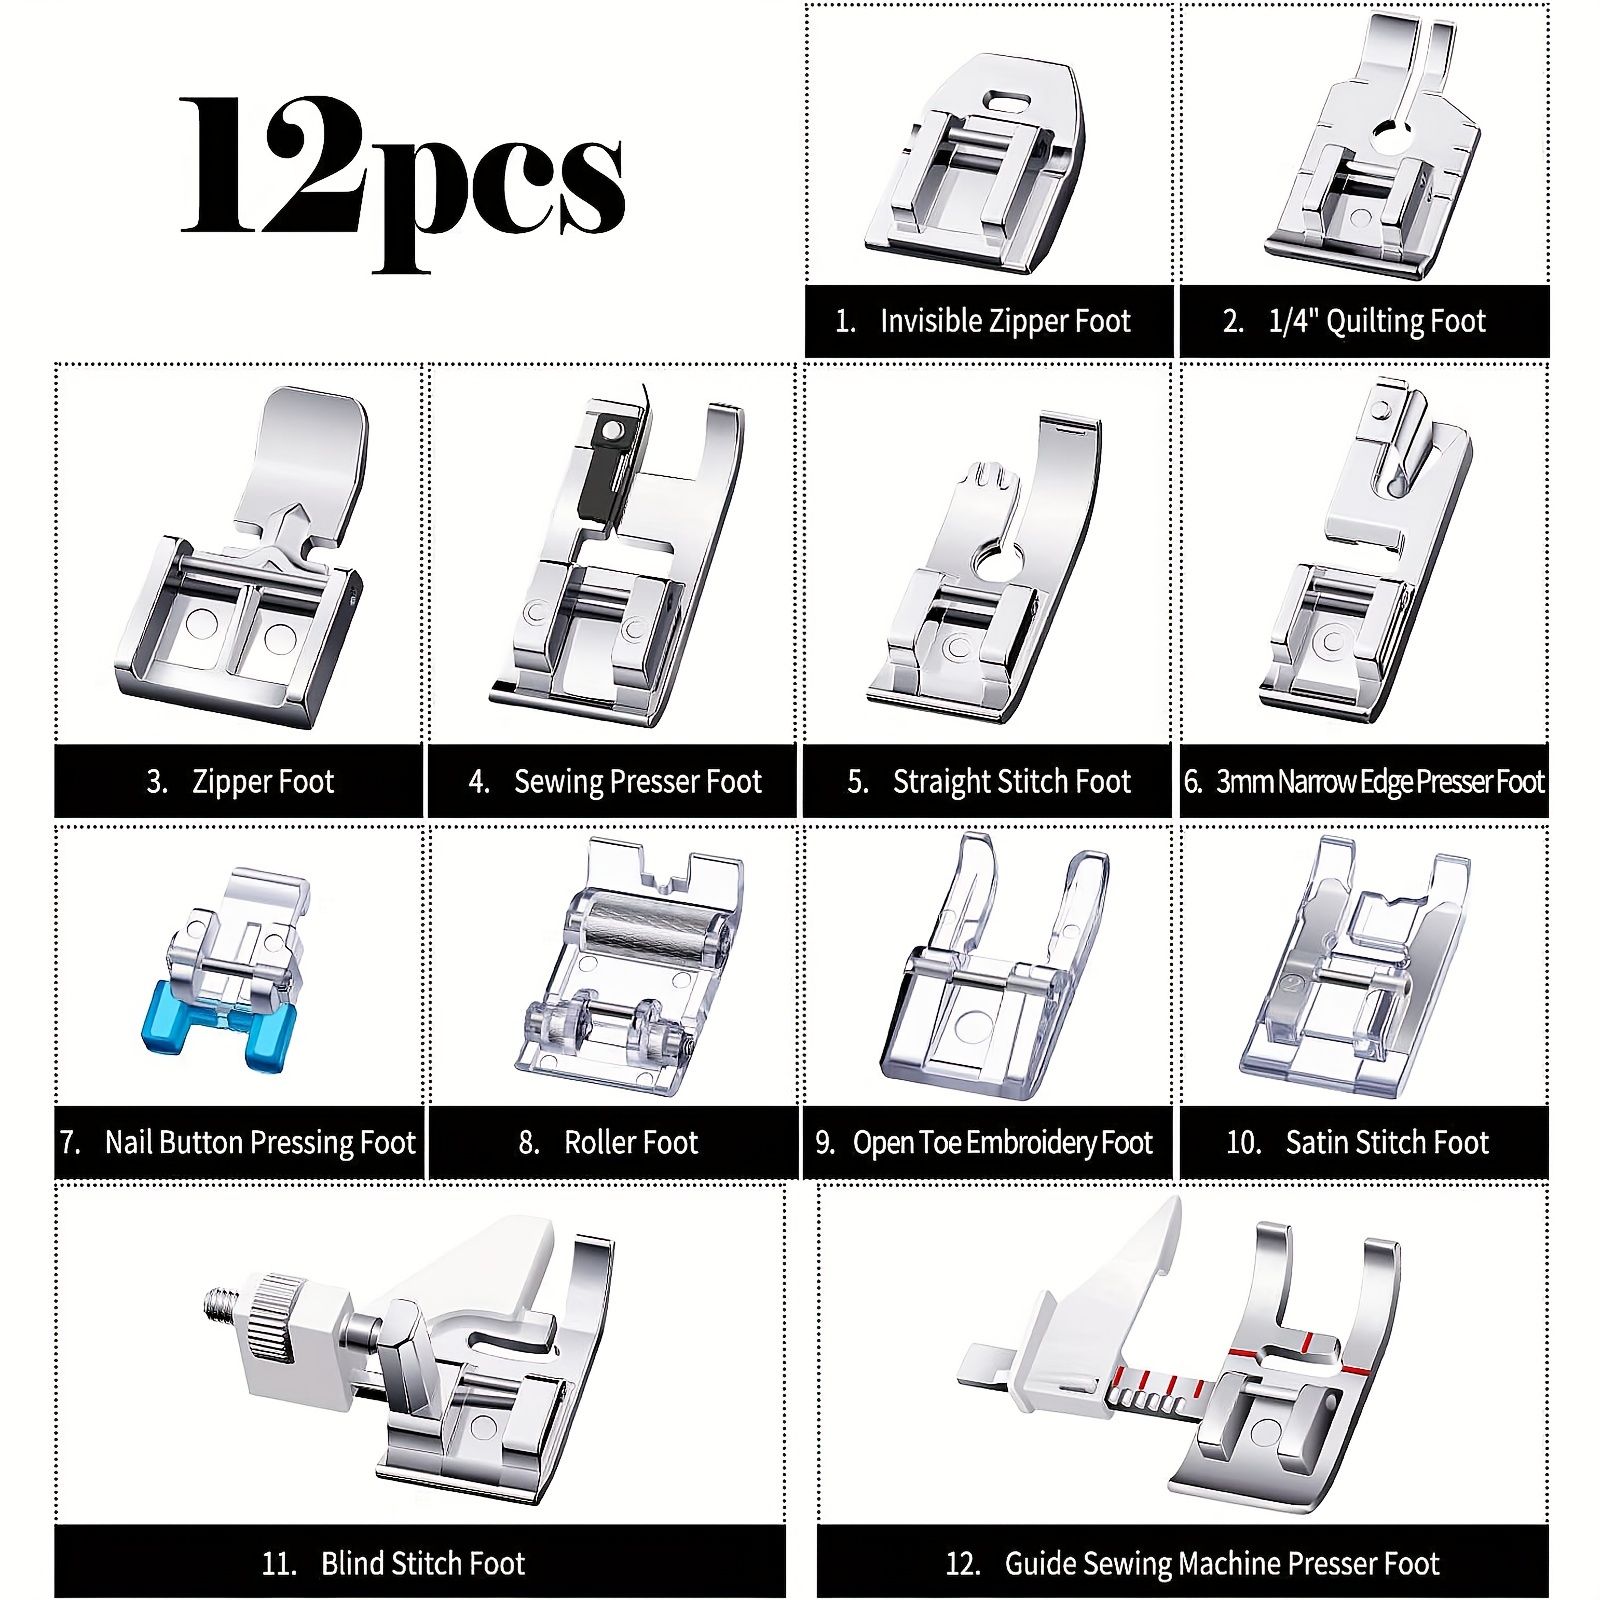 Msbd 32pcs Sewing Machine Presser Feet Kit, Home Sewing Machine Hemming Foot  Parts Accessories For Babylock Janome Brother Singer Toyota